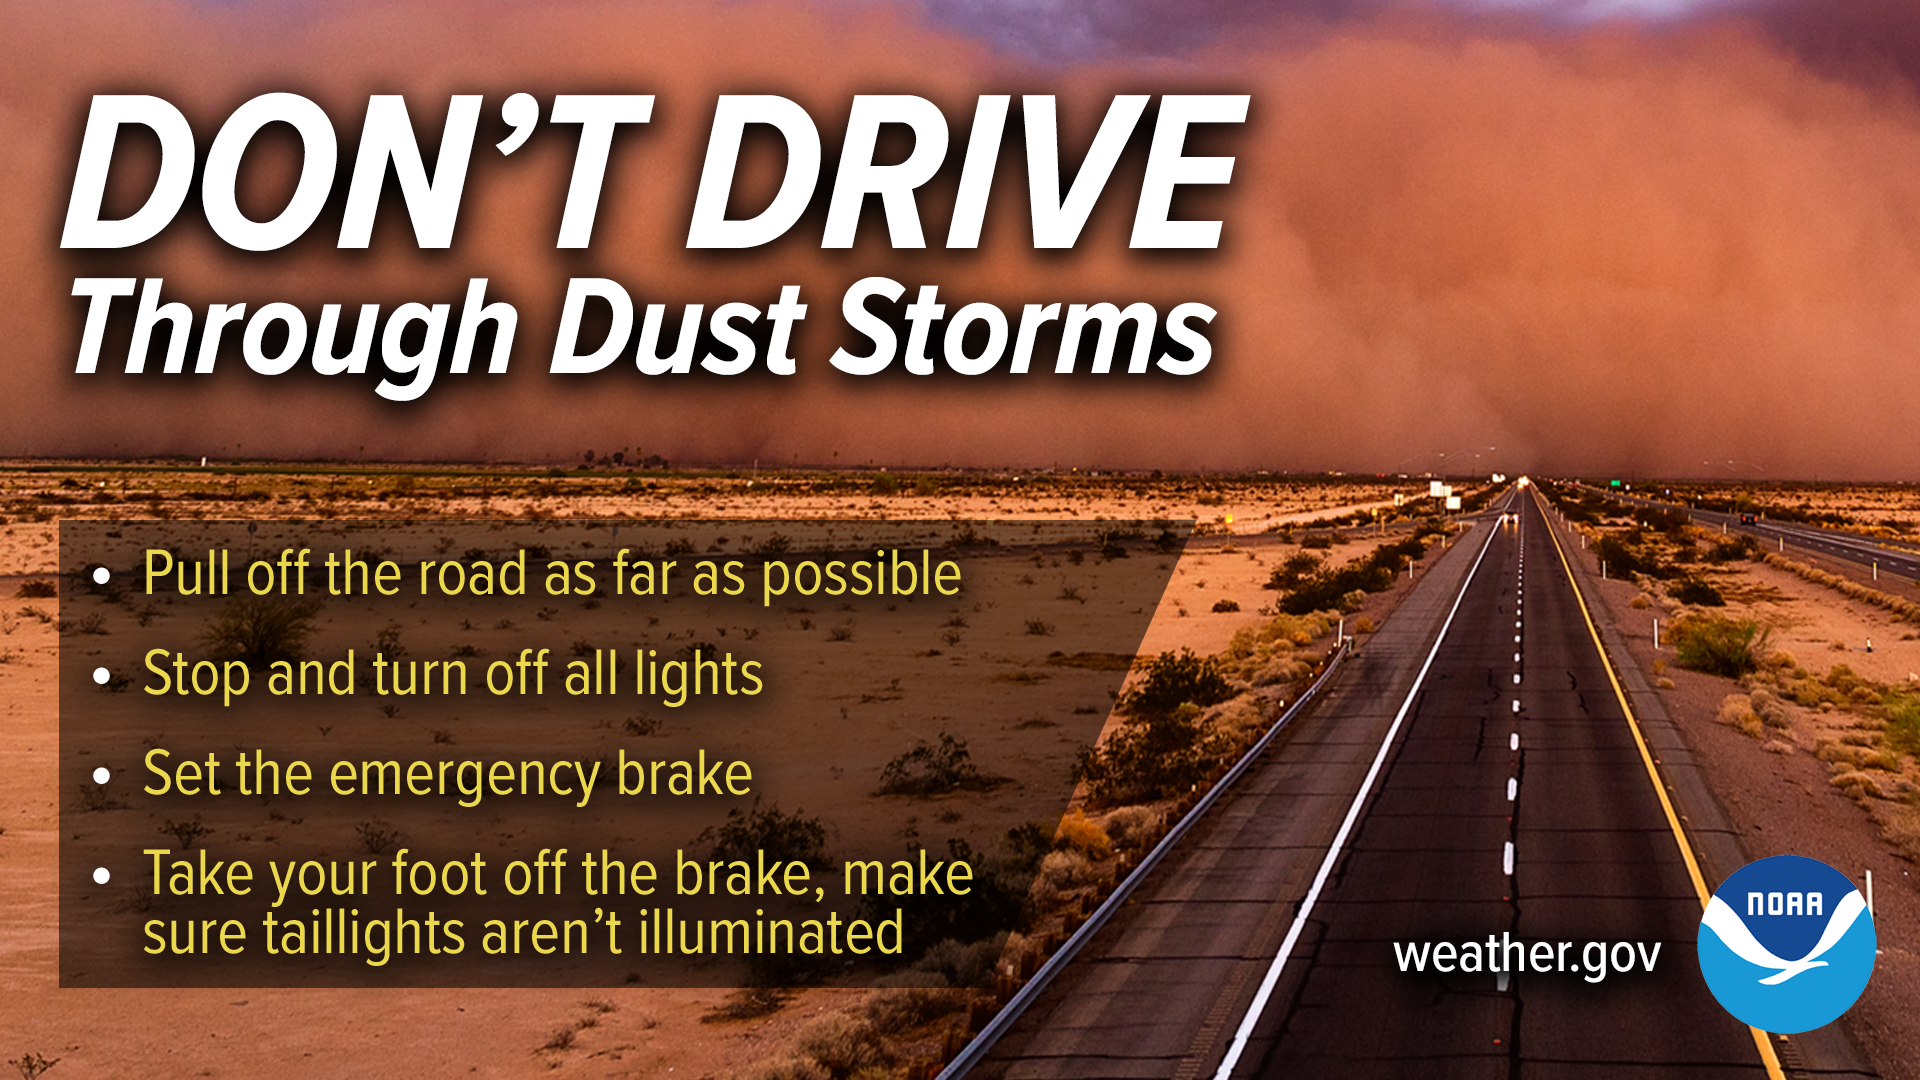 Don't drive through dust storms. Pull off the road as far as possible. Stop and turn off all lights. Set the emergency brake. Take your foot off the brake, make sure taillights aren't illuminated.